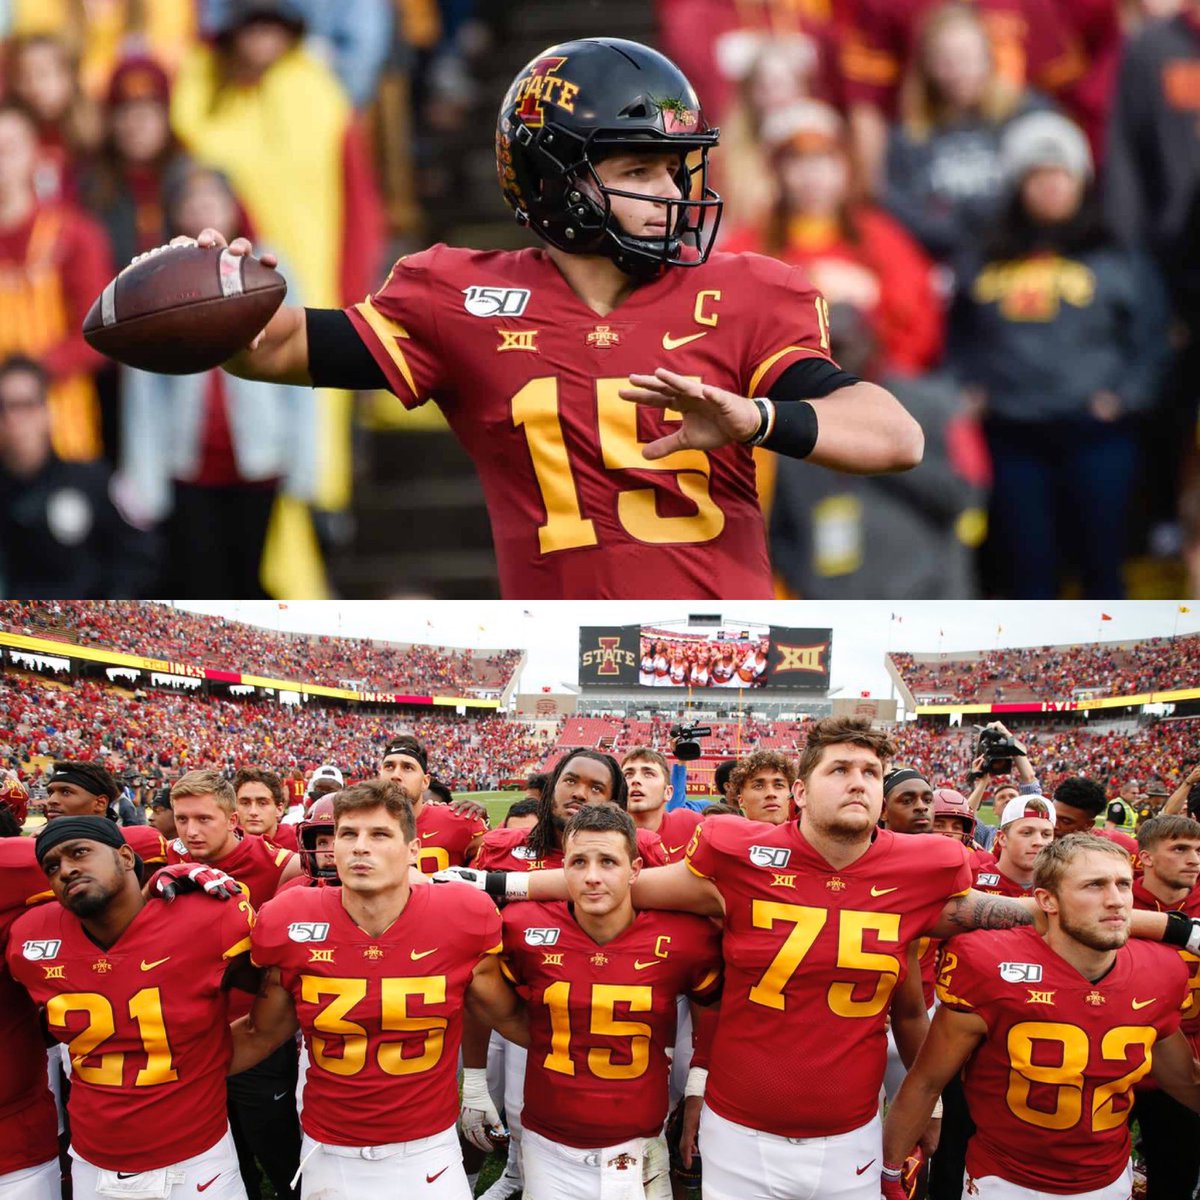 #AGTG Very blessed to say I have received an Offer from Iowa State University. 
@ISUMattCampbell 
@CoachJGordo 
@coach_horsepwr